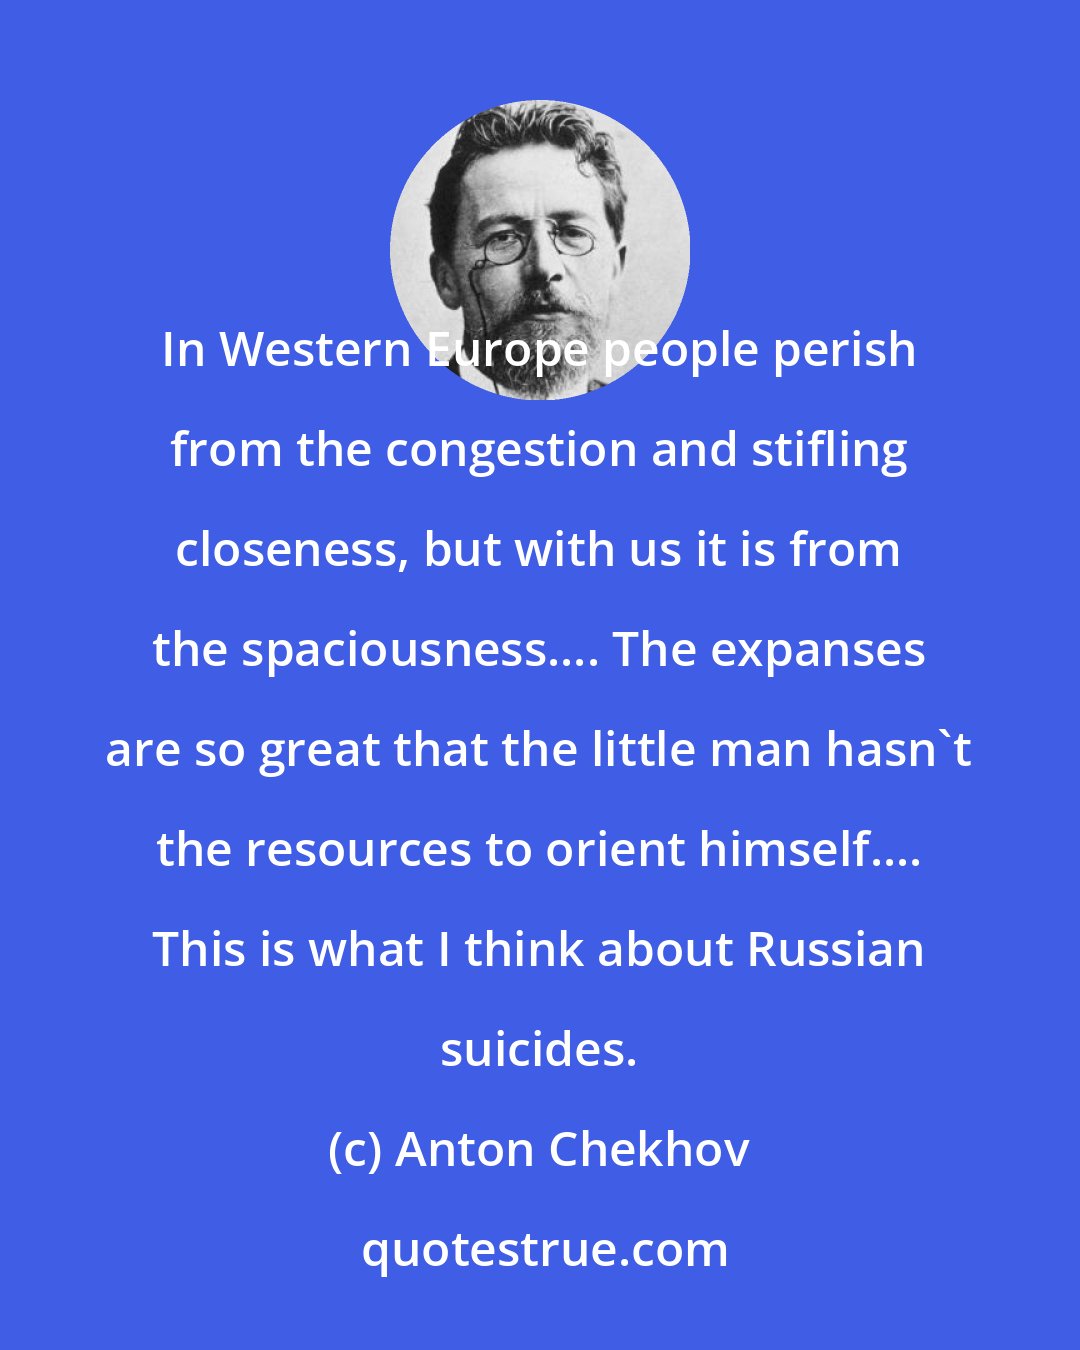 Anton Chekhov: In Western Europe people perish from the congestion and stifling closeness, but with us it is from the spaciousness.... The expanses are so great that the little man hasn't the resources to orient himself.... This is what I think about Russian suicides.